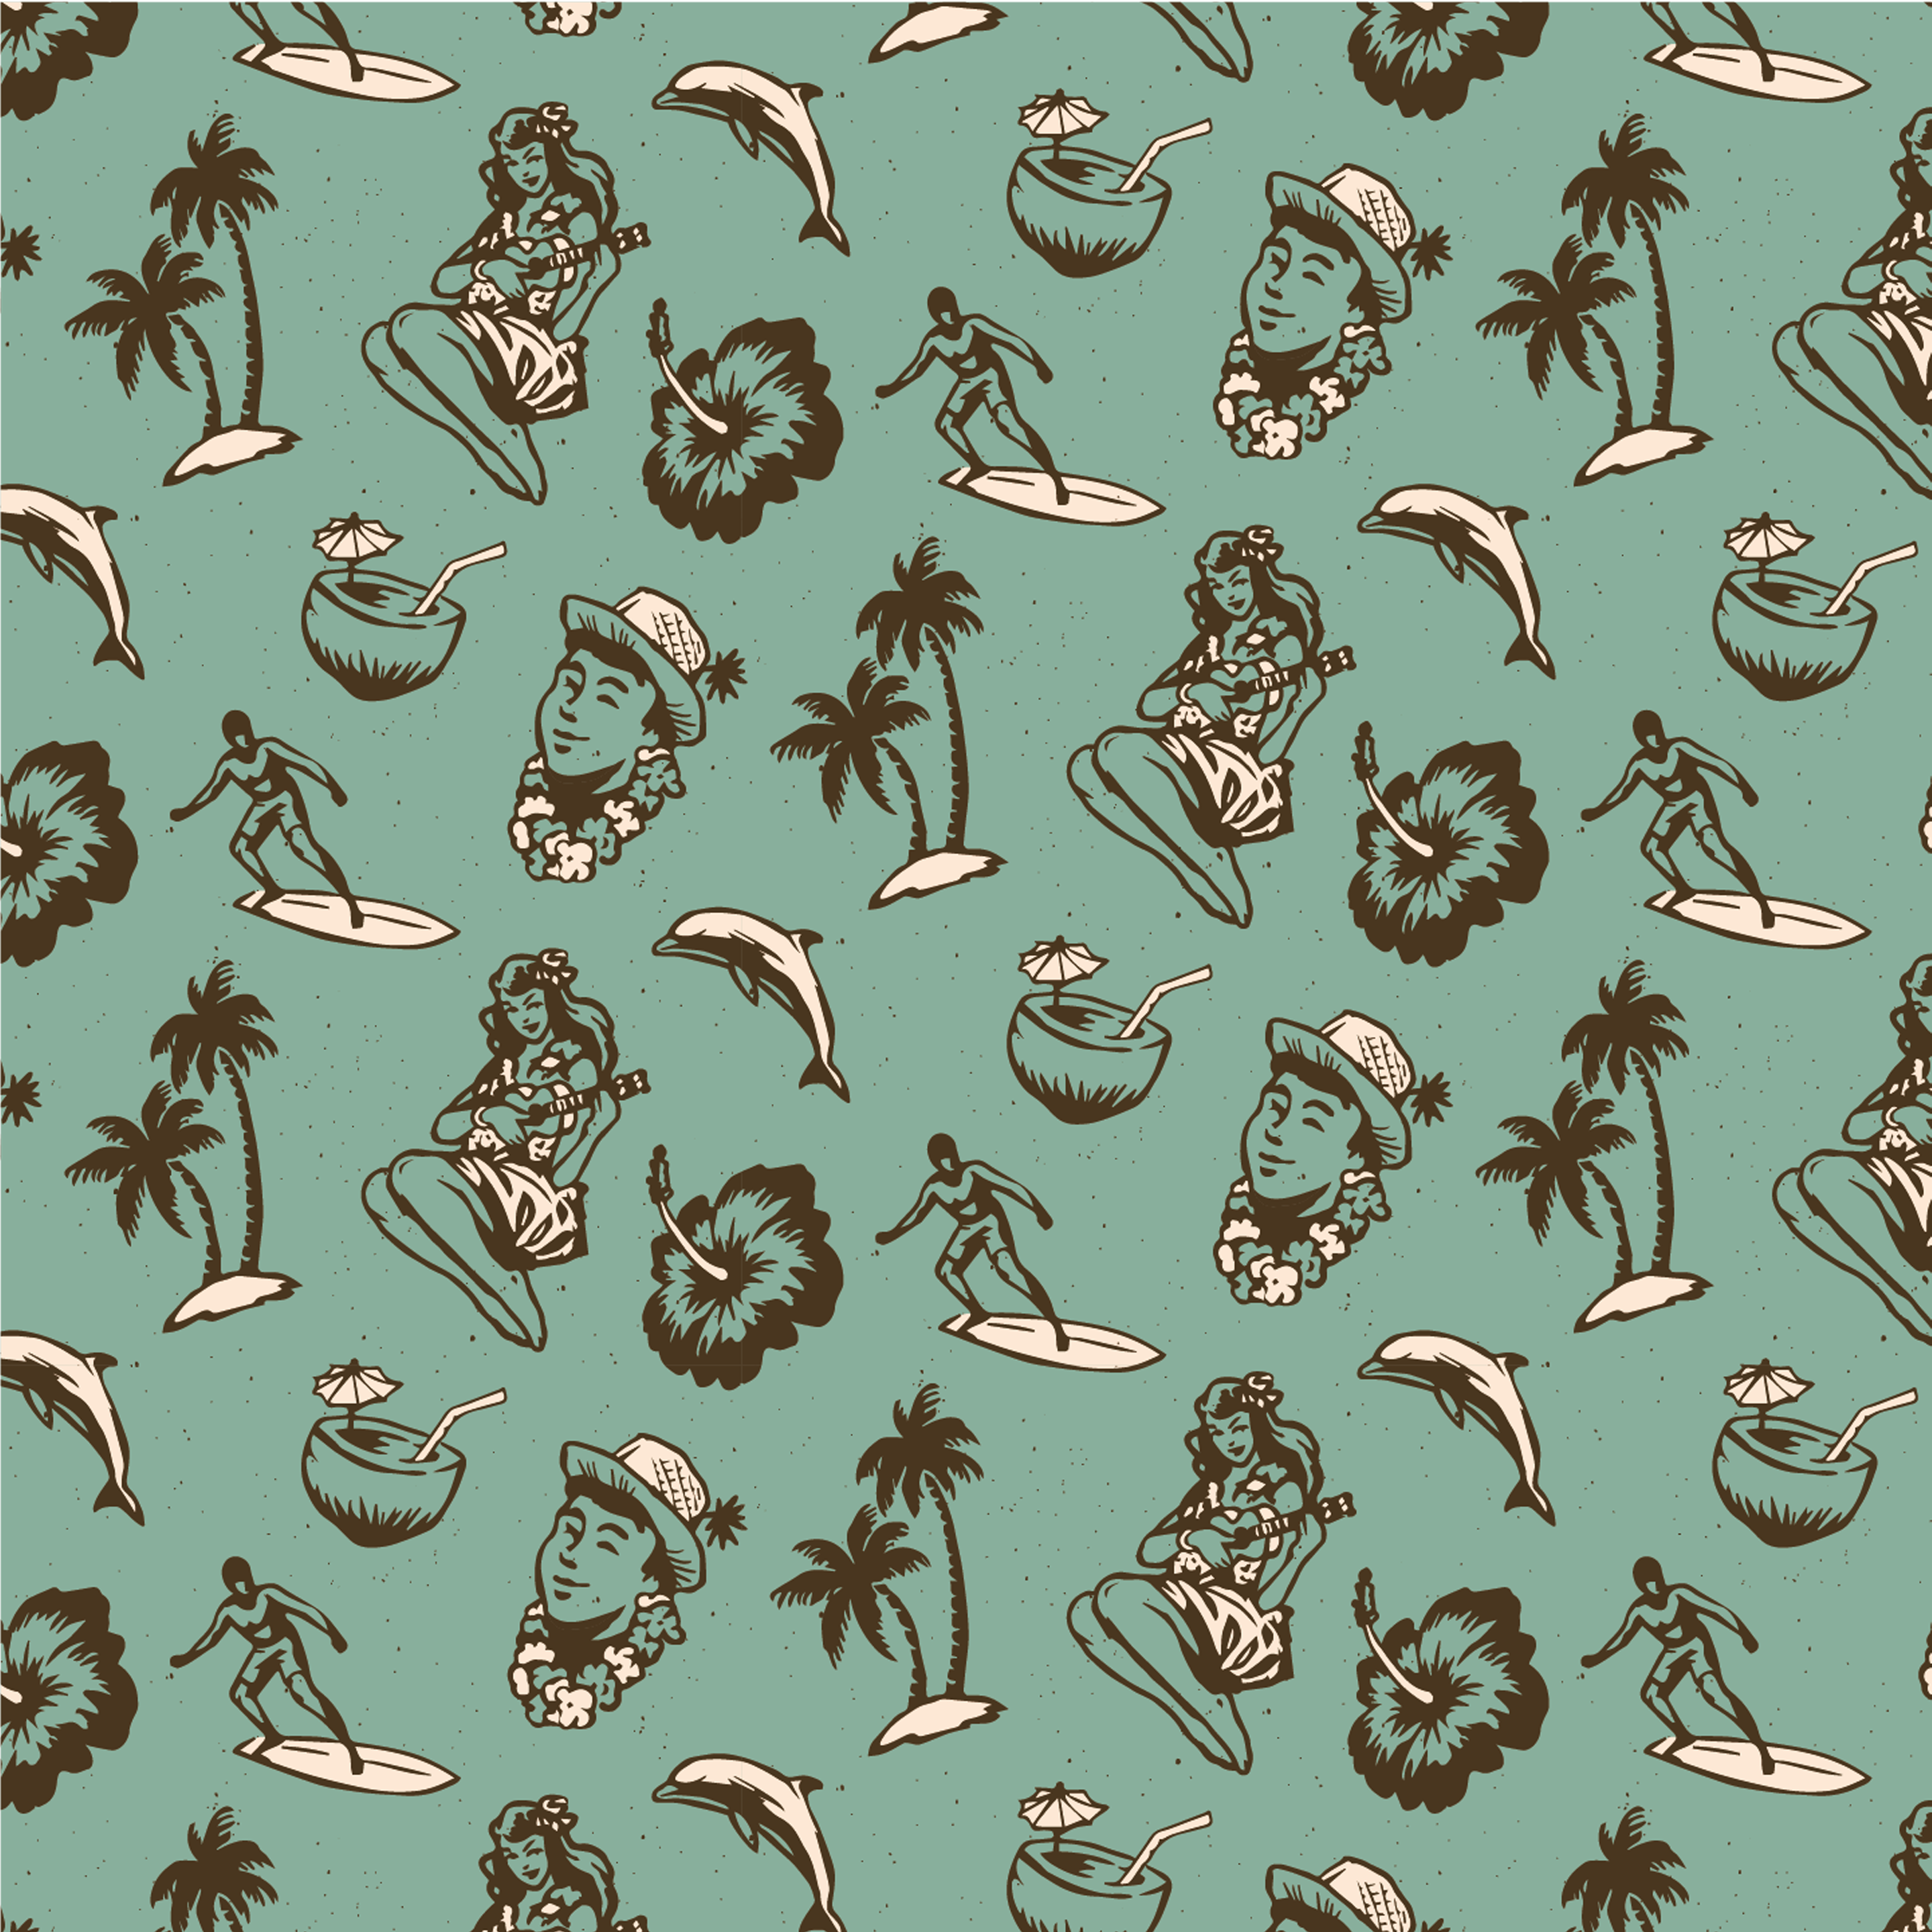 vintage-tropical-vacation-pattern-design-theme